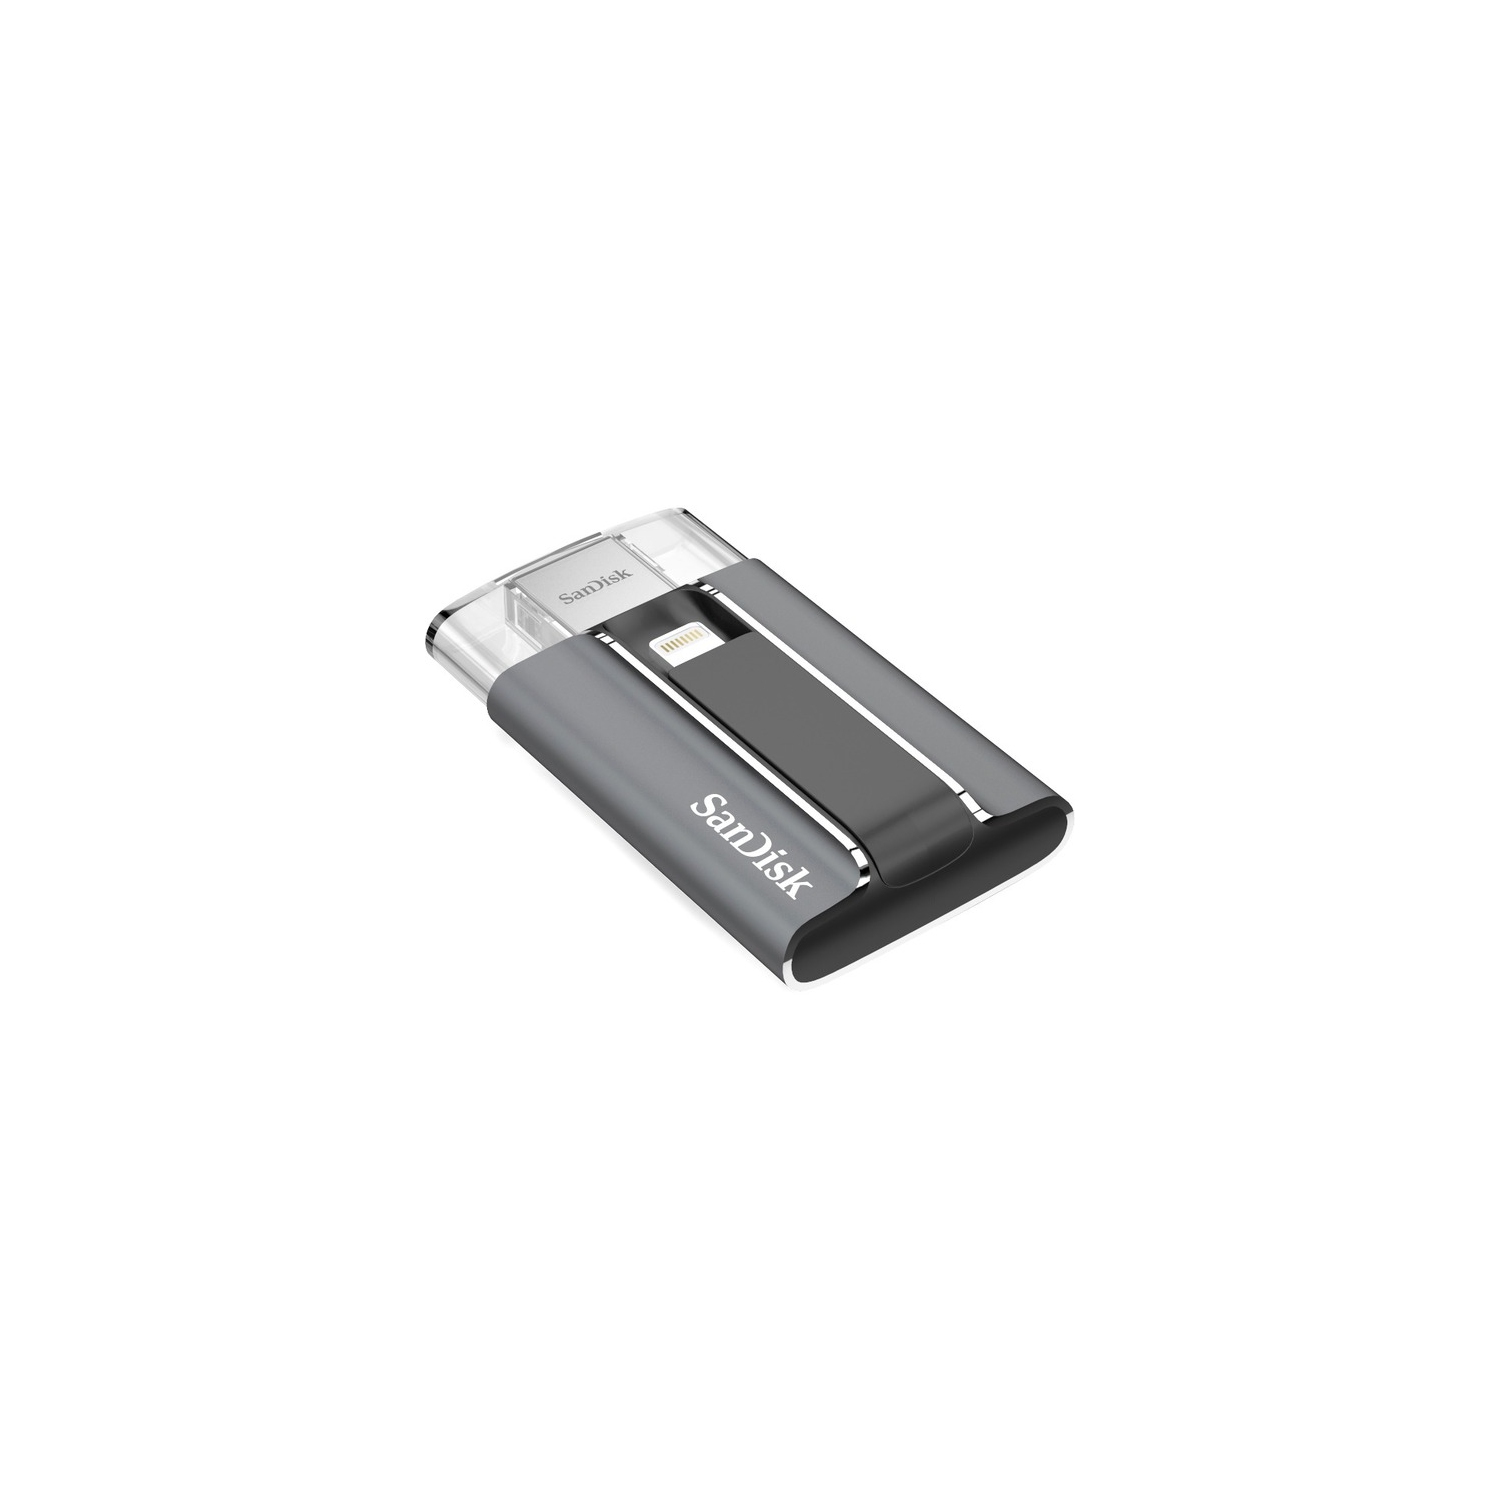 SanDisk iXpand Flash Drive For iPhone and iPad - 64GB